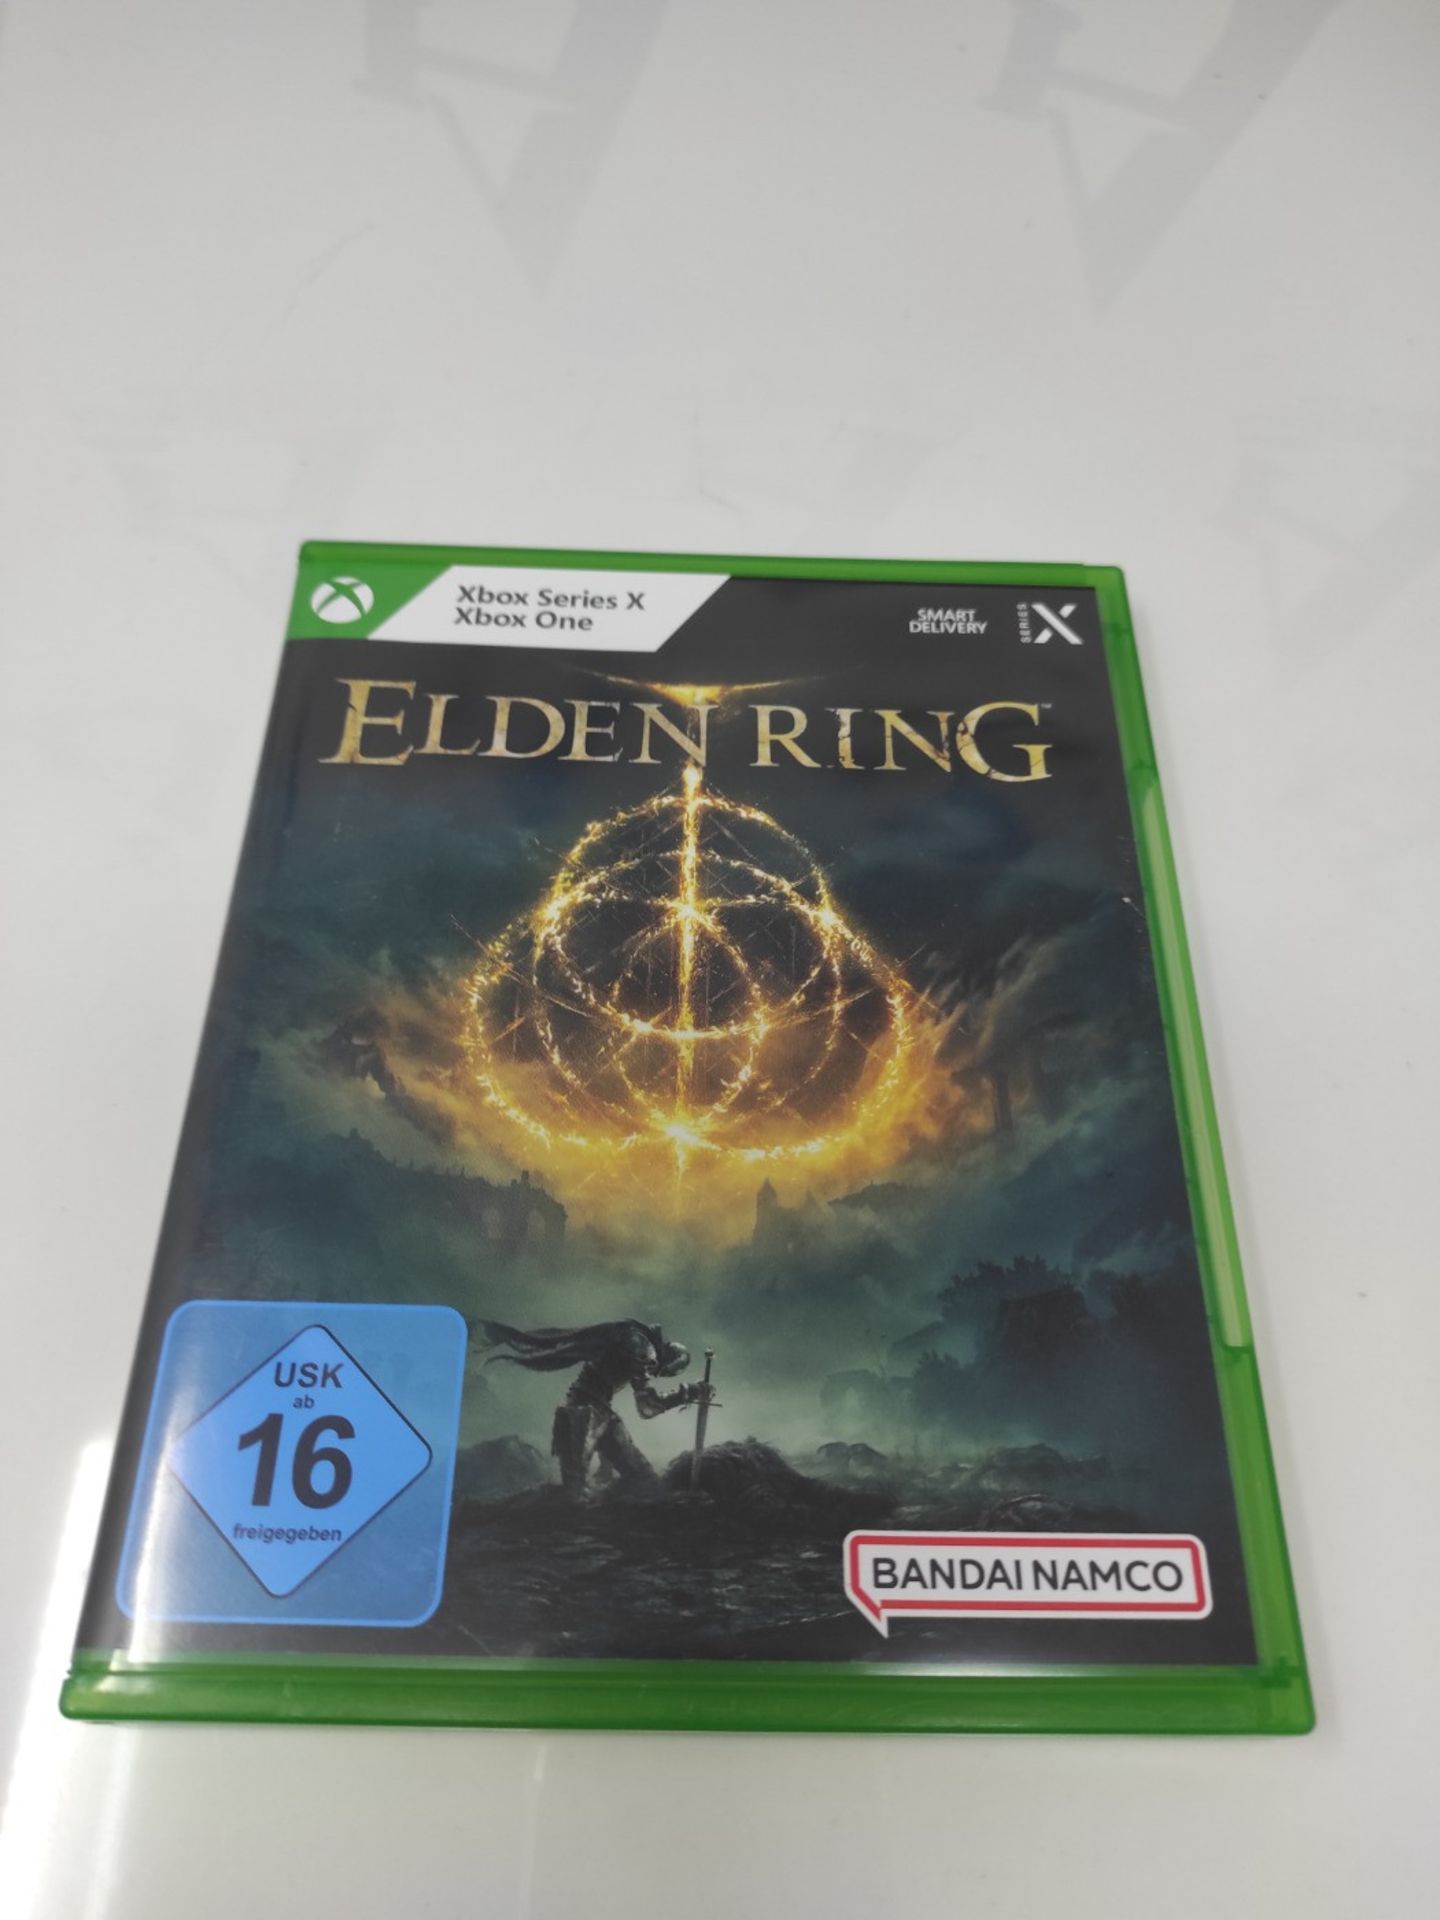 ELDEN RING - Standard Edition [Xbox One] | Free upgrade to Xbox Series X - Image 5 of 6